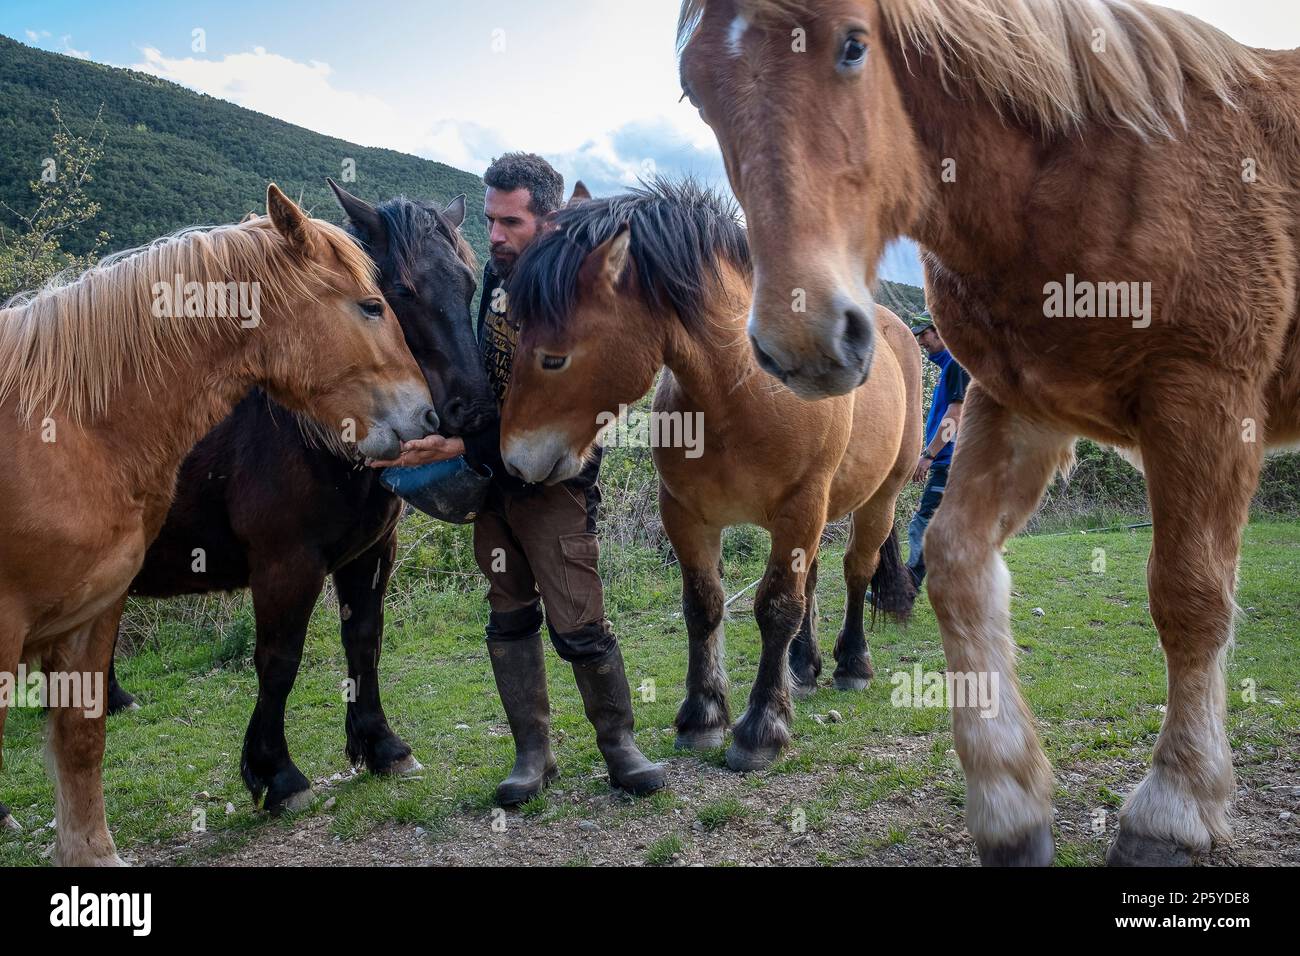 Miquel at work. Daily life, in a traditional farm on the mountains, Roni village, Alt Pirineu Natural Park, Lleida, Catalonia, Spain Stock Photo